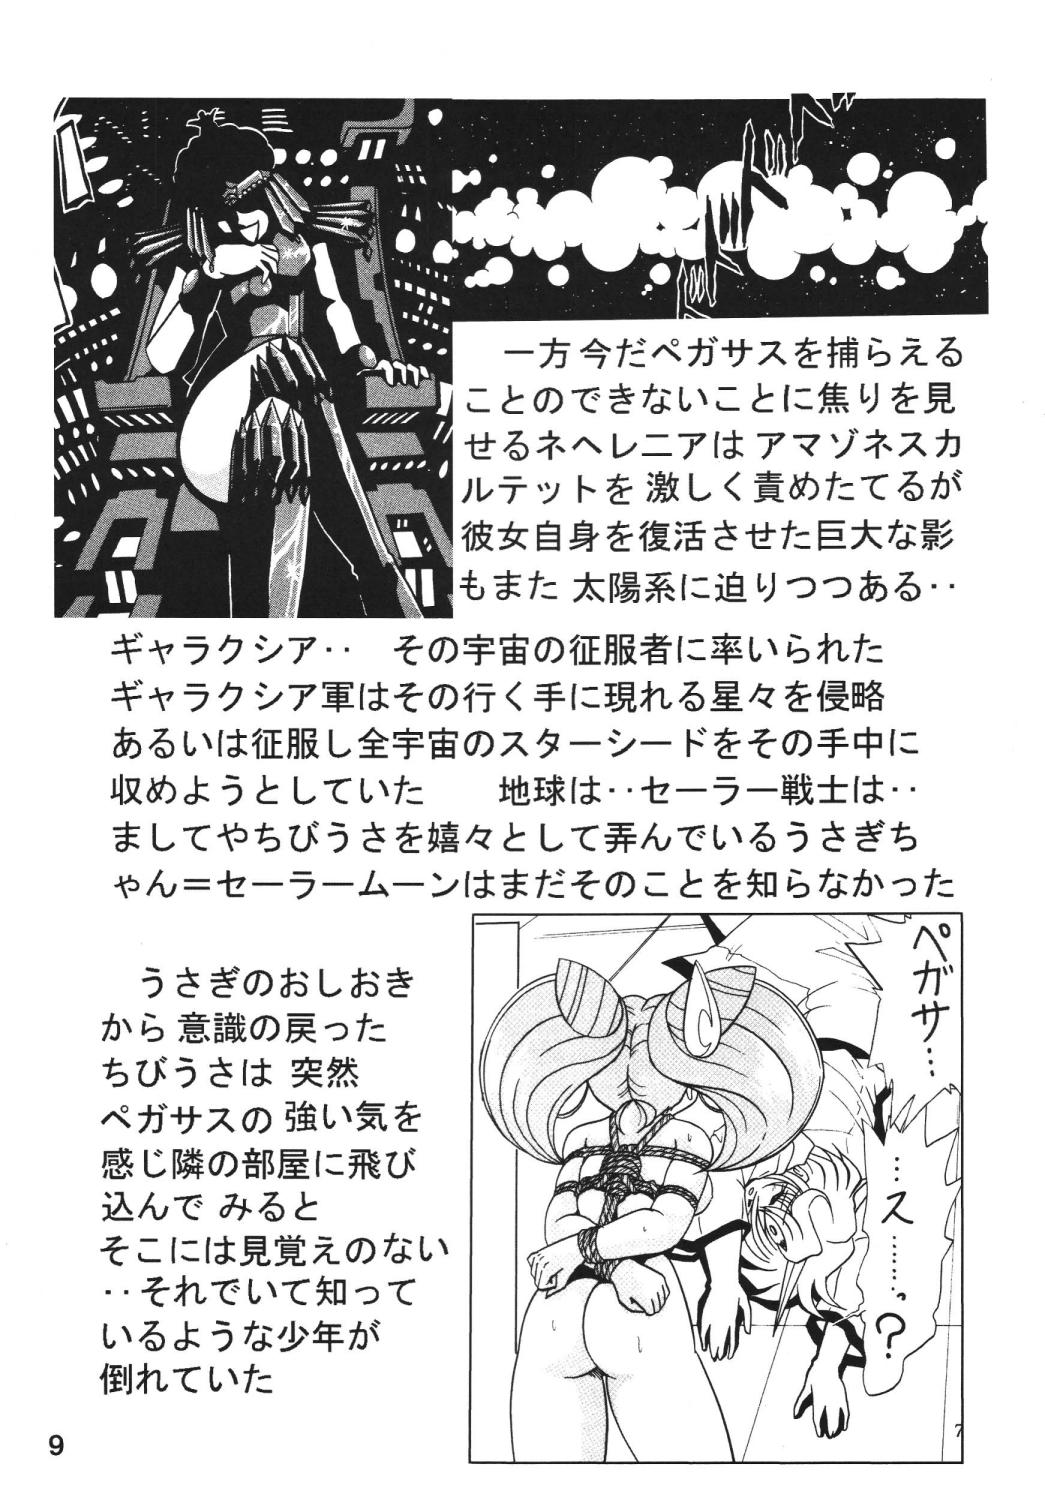 Reverse Cowgirl Silent Saturn SS vol. 7 - Sailor moon Vietnamese - Page 8